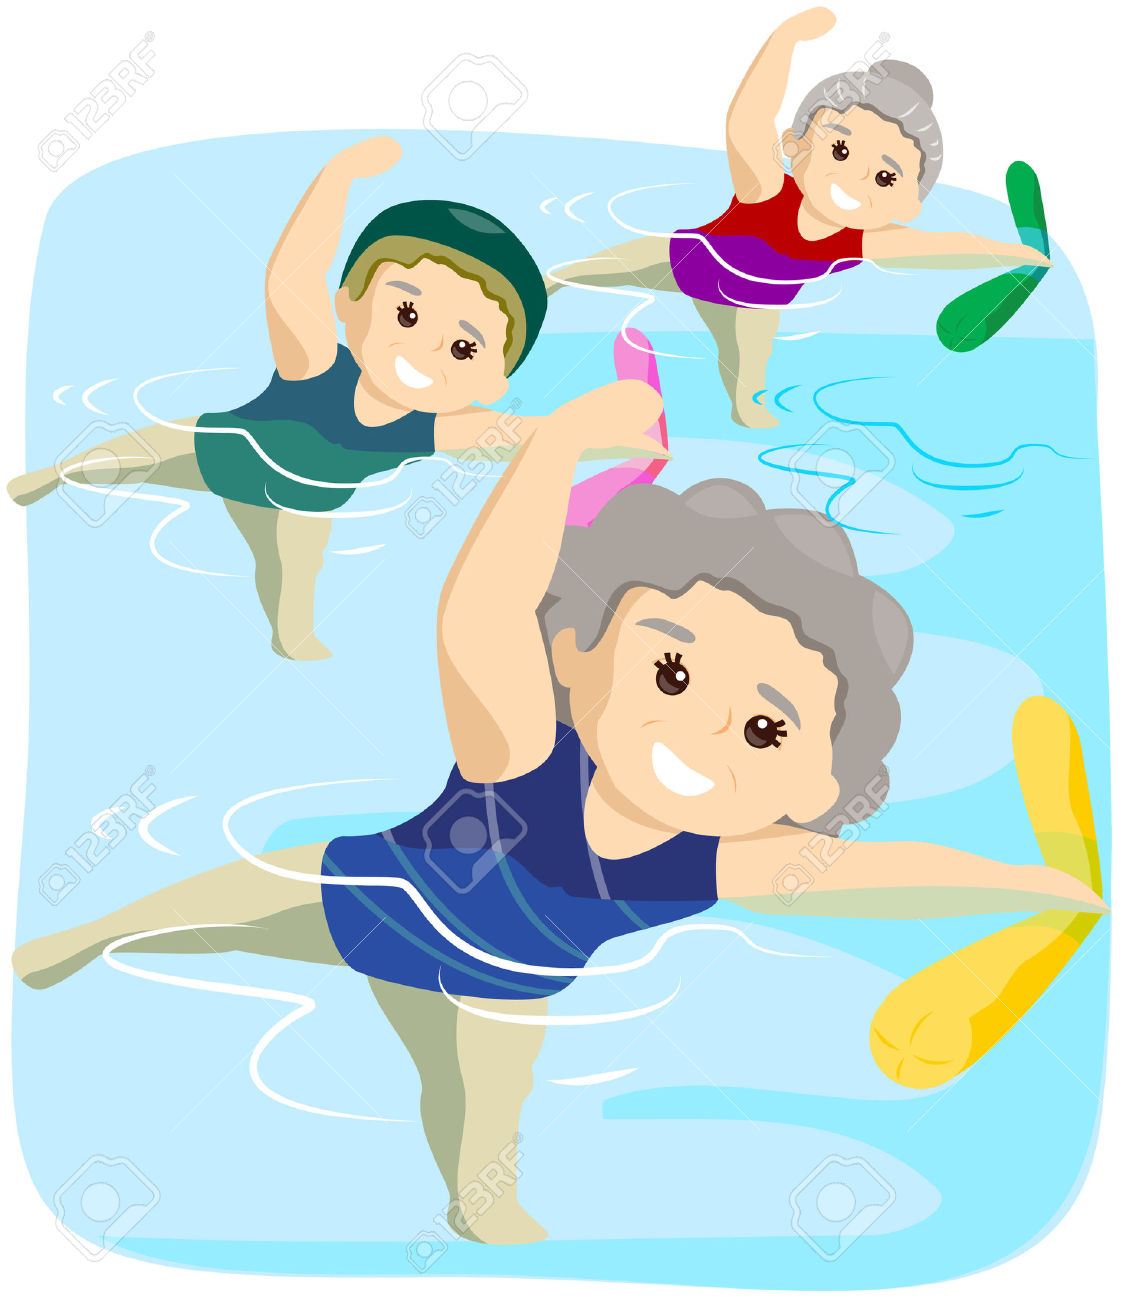 4090183-Water-Exercise-for-Seniors-with-Clipping-Path-Stock-Vector-swimming